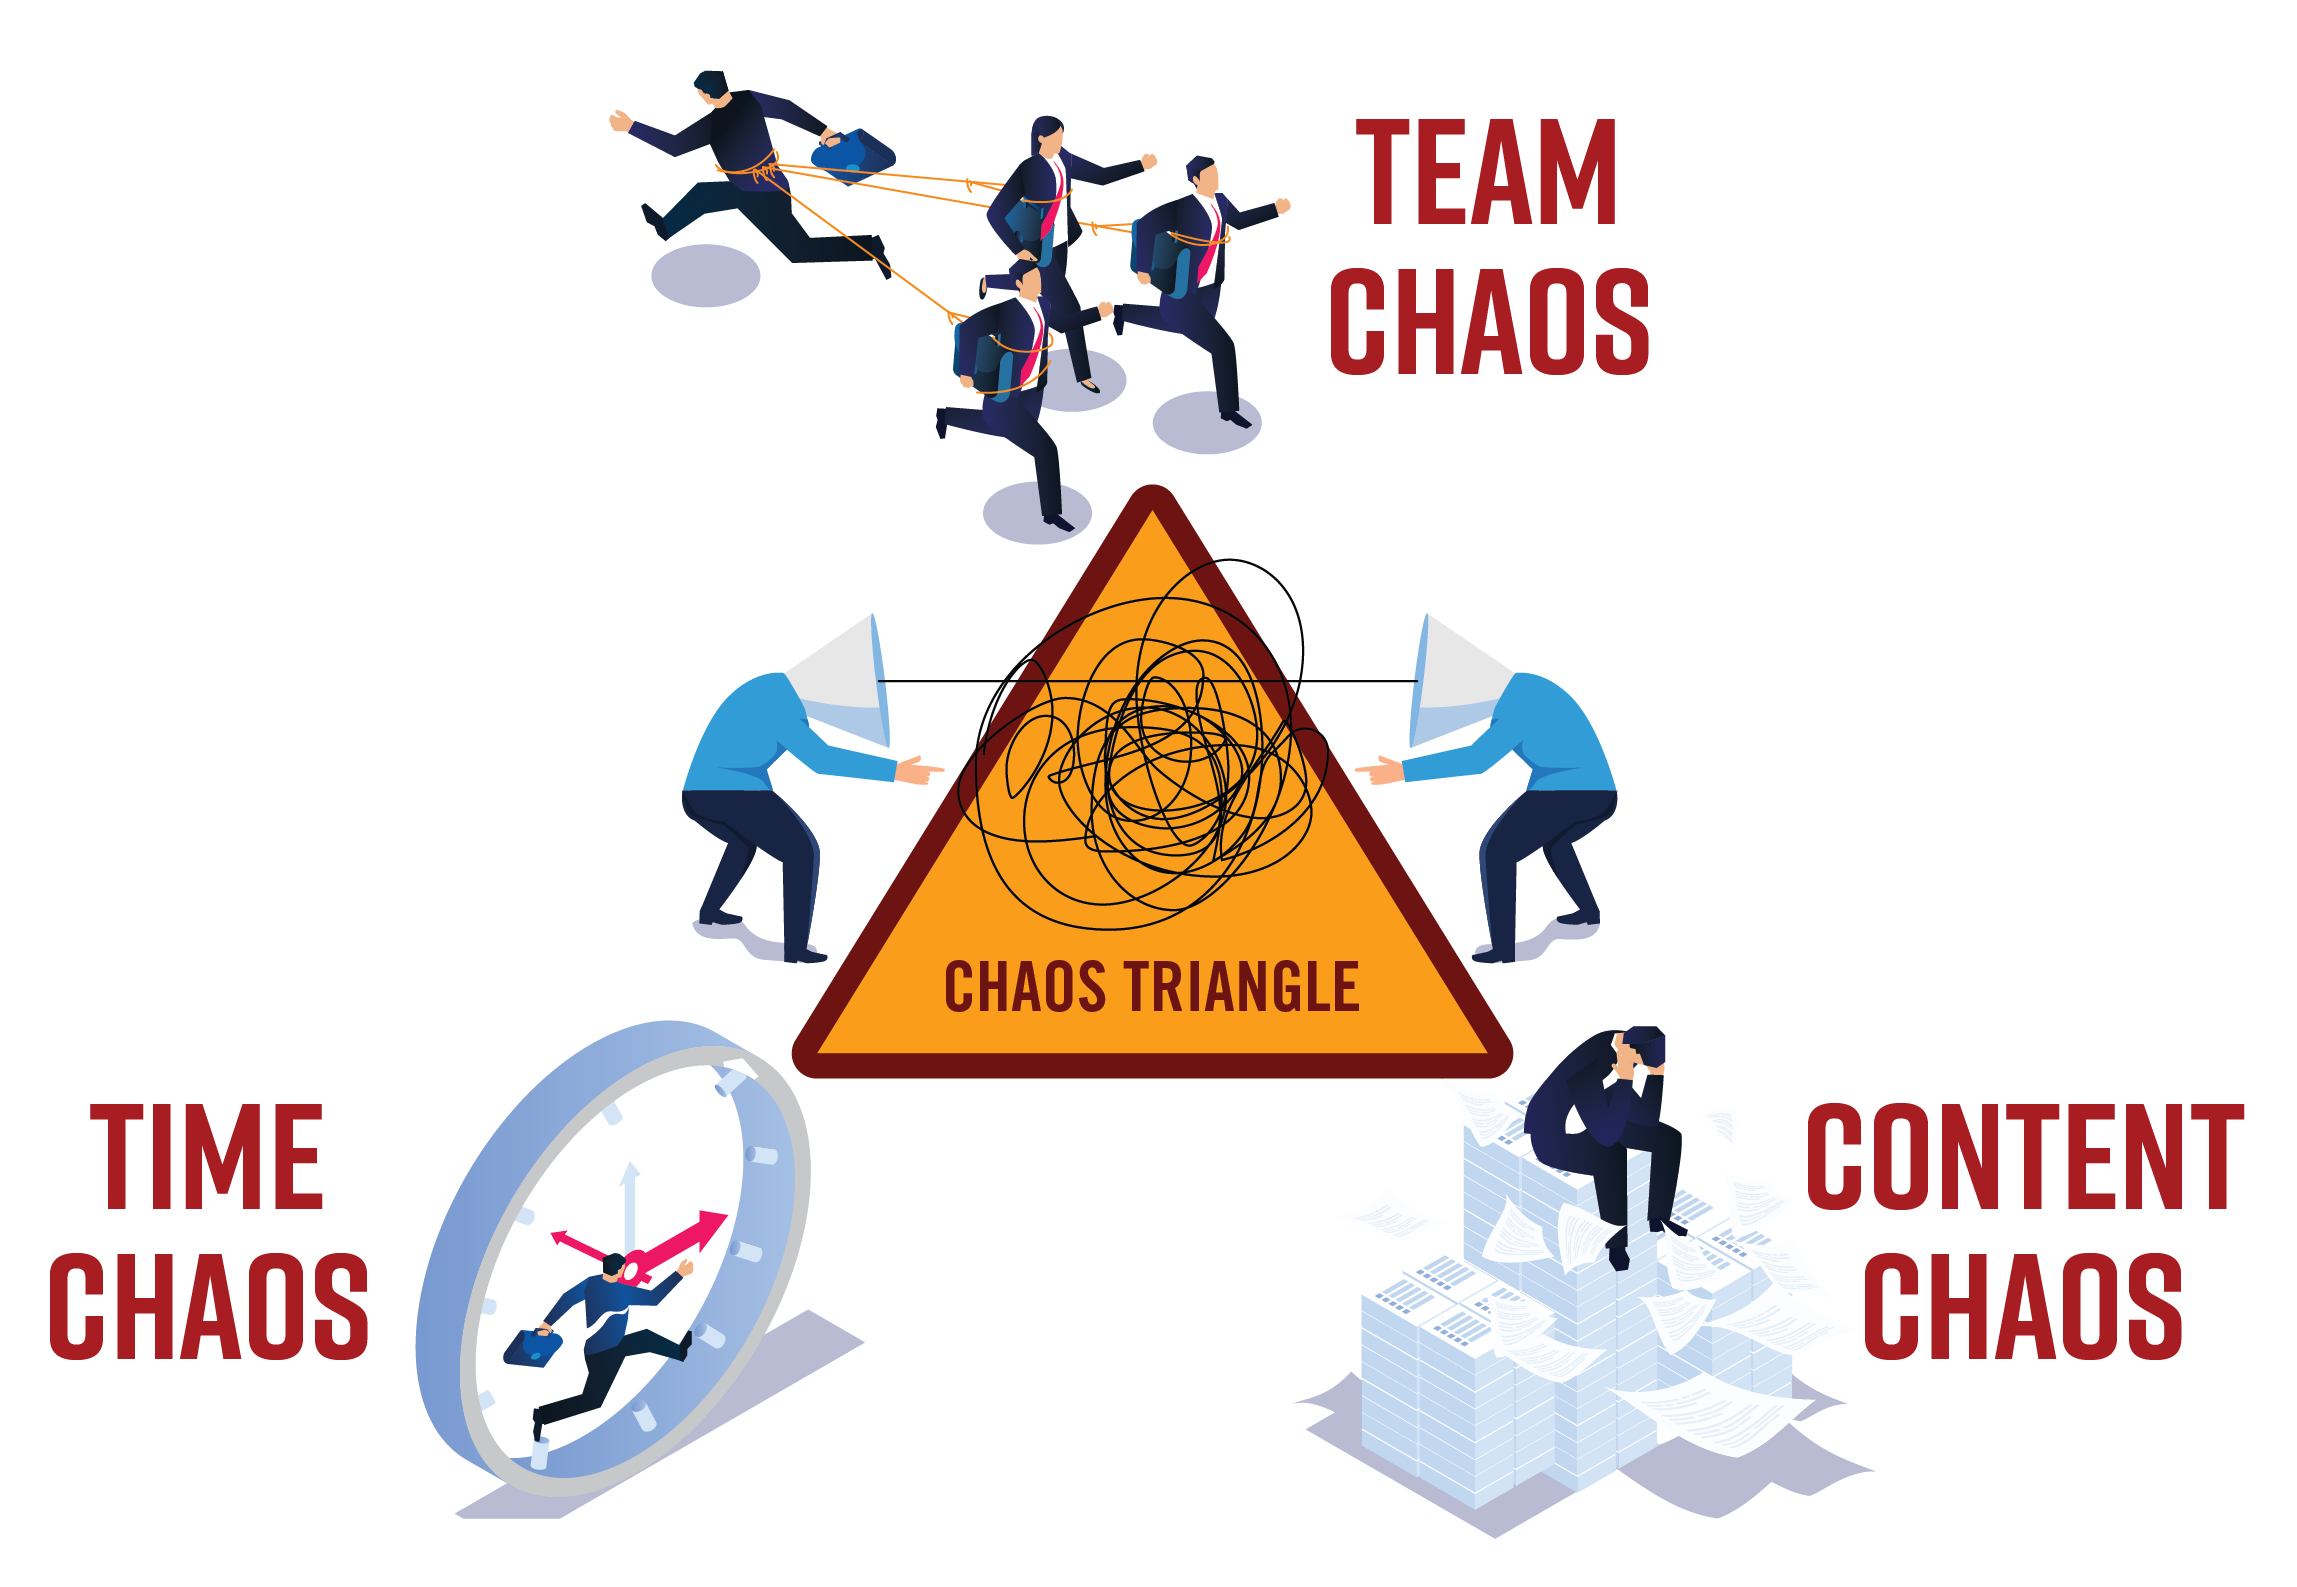 A triangle highligting graphically the three areas of chaos that people writing large proposals can face - Team, Time and Content chaos